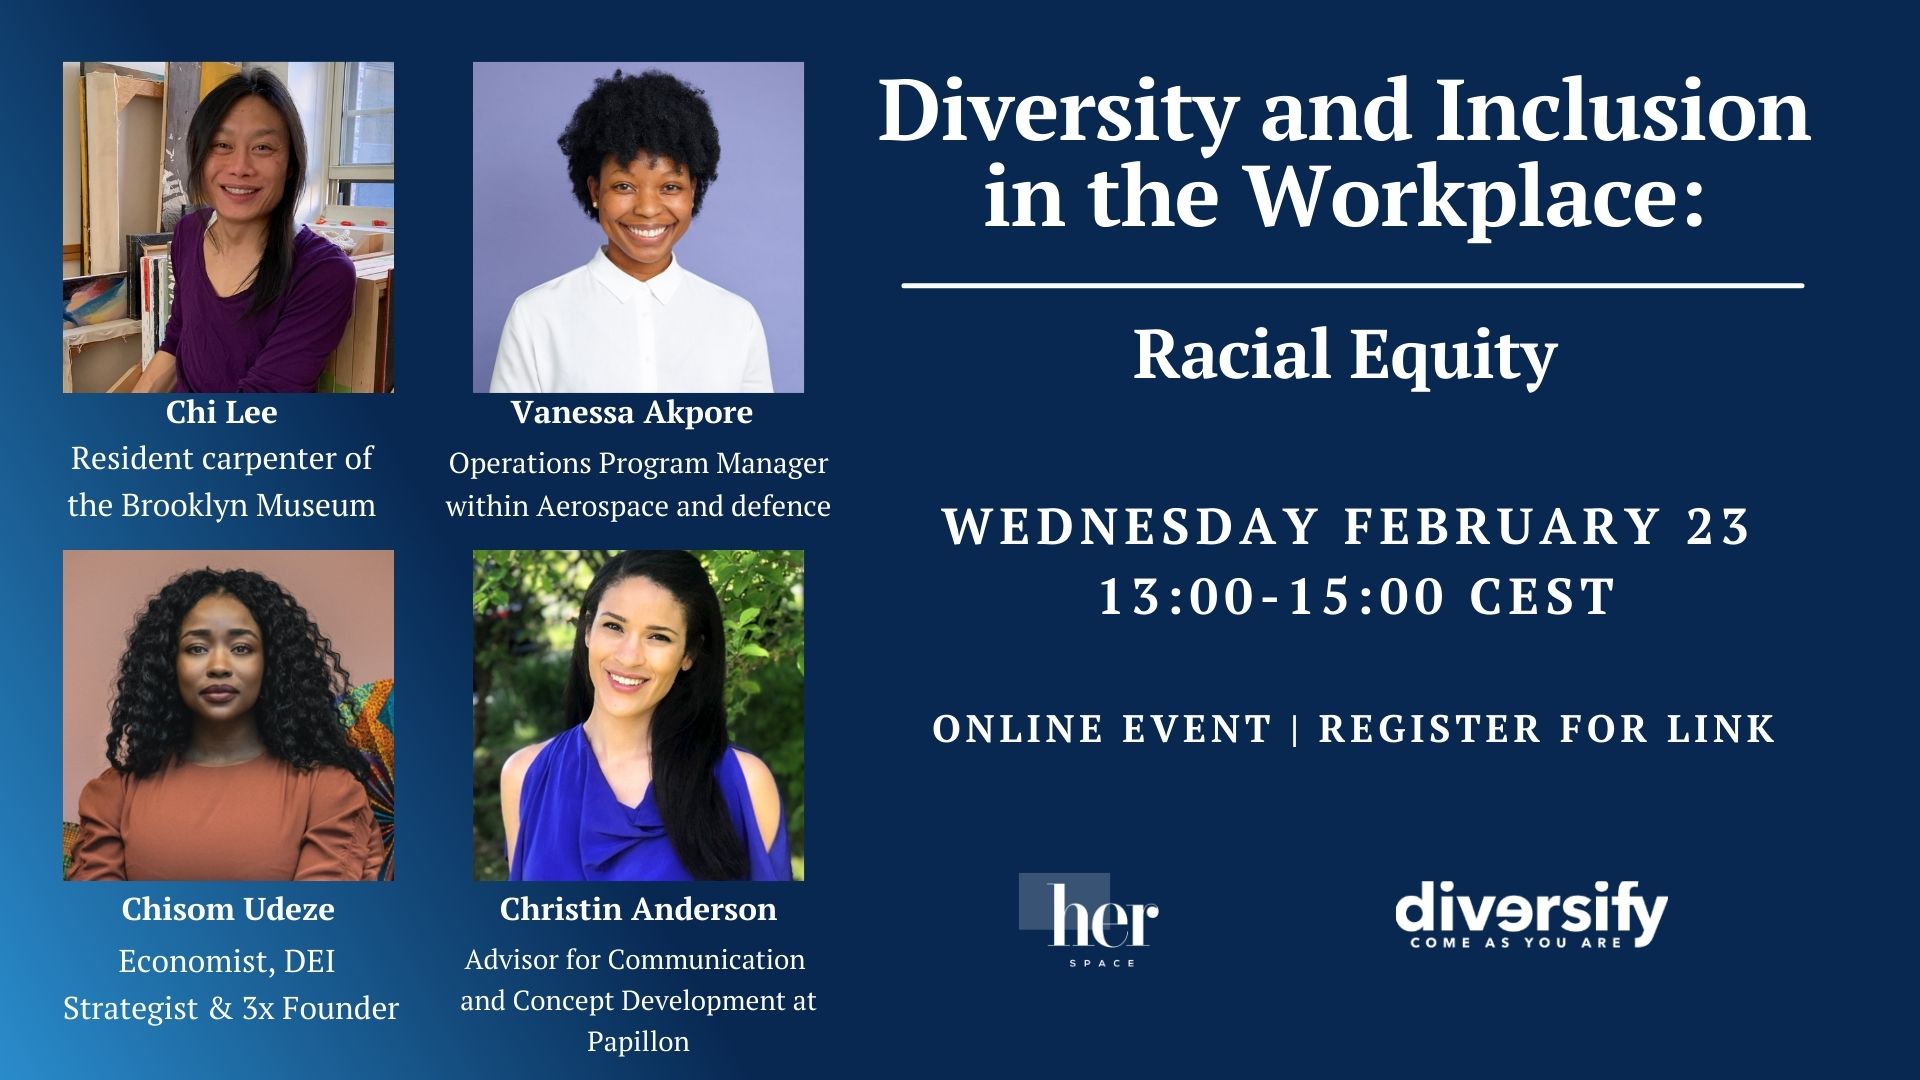 Diversity and Inclusion in the Workplace: Racial Equity